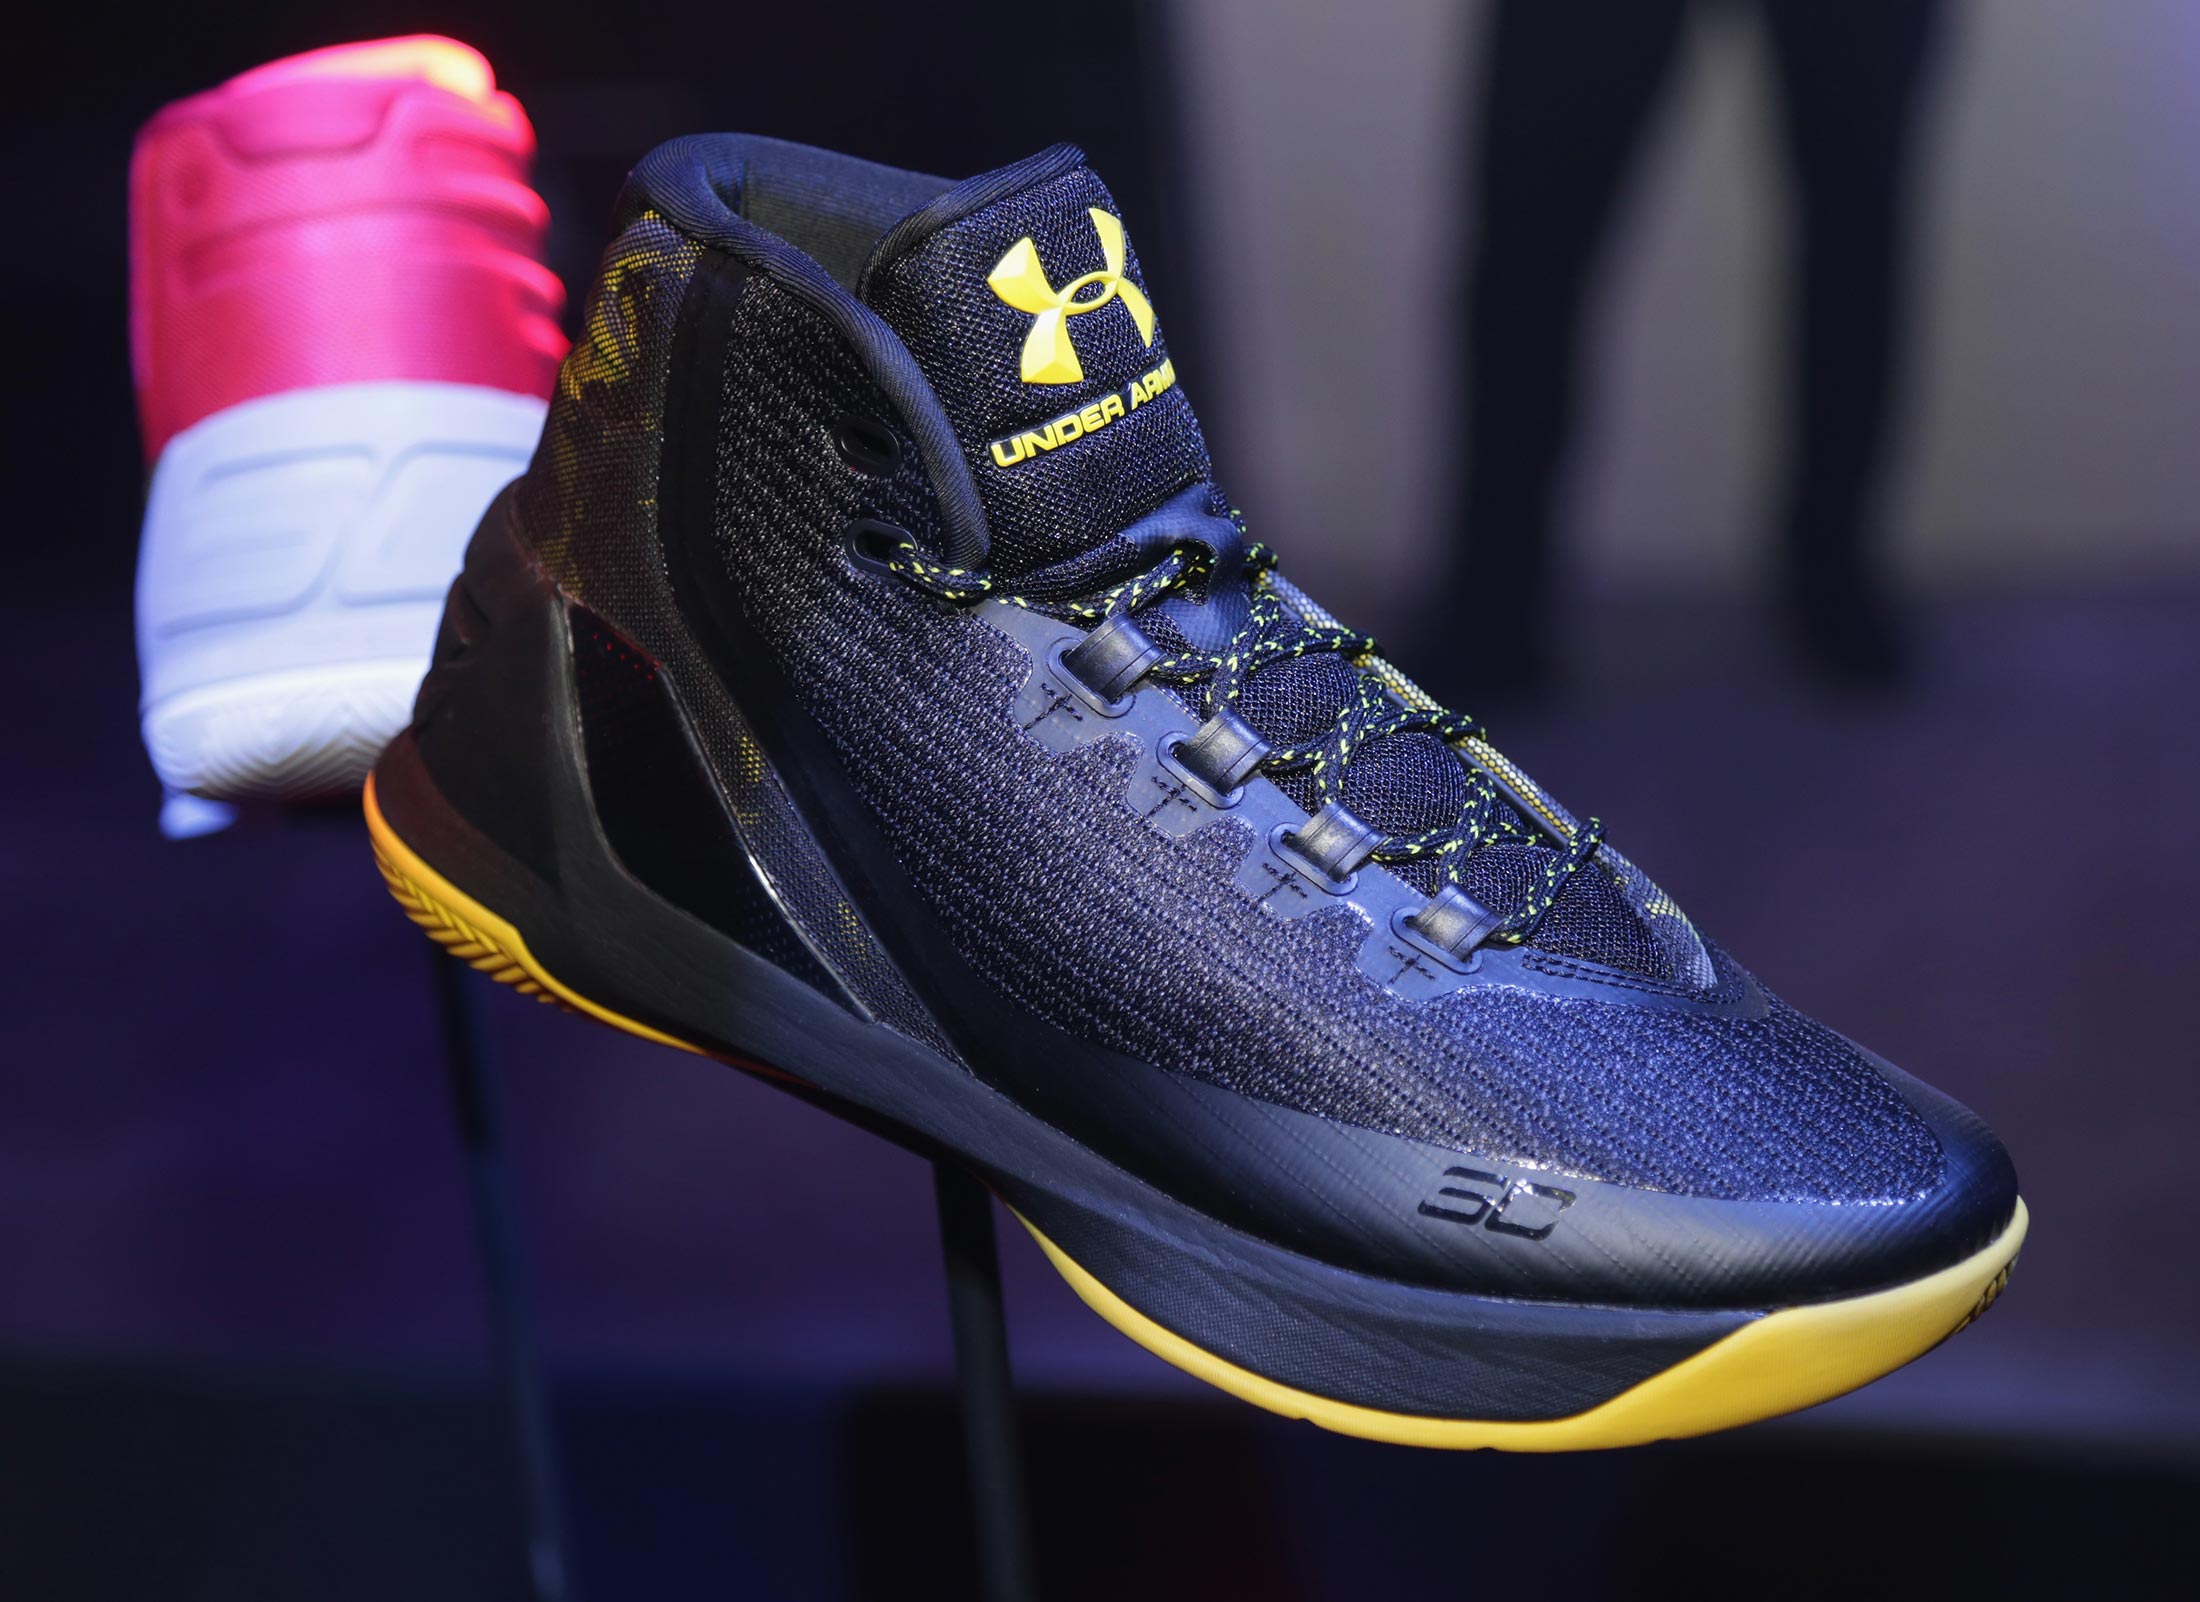 Under Armour Declines Over Fears That Steph Curry Shoe Is a Flop - Bloomberg